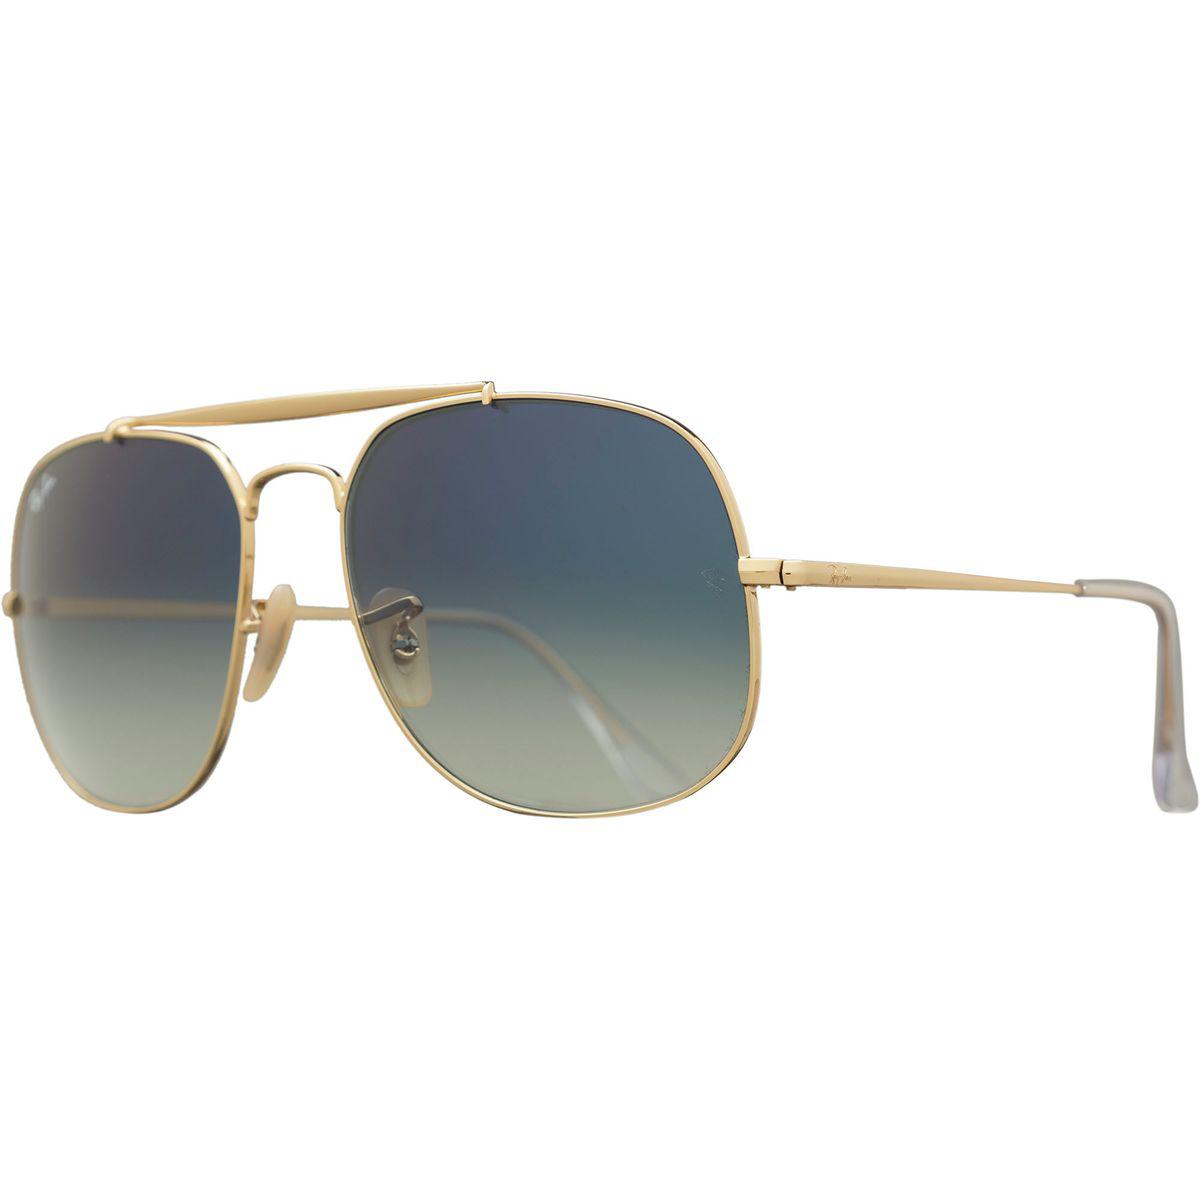 Ray-Ban Steel Man General Sunglasses in 